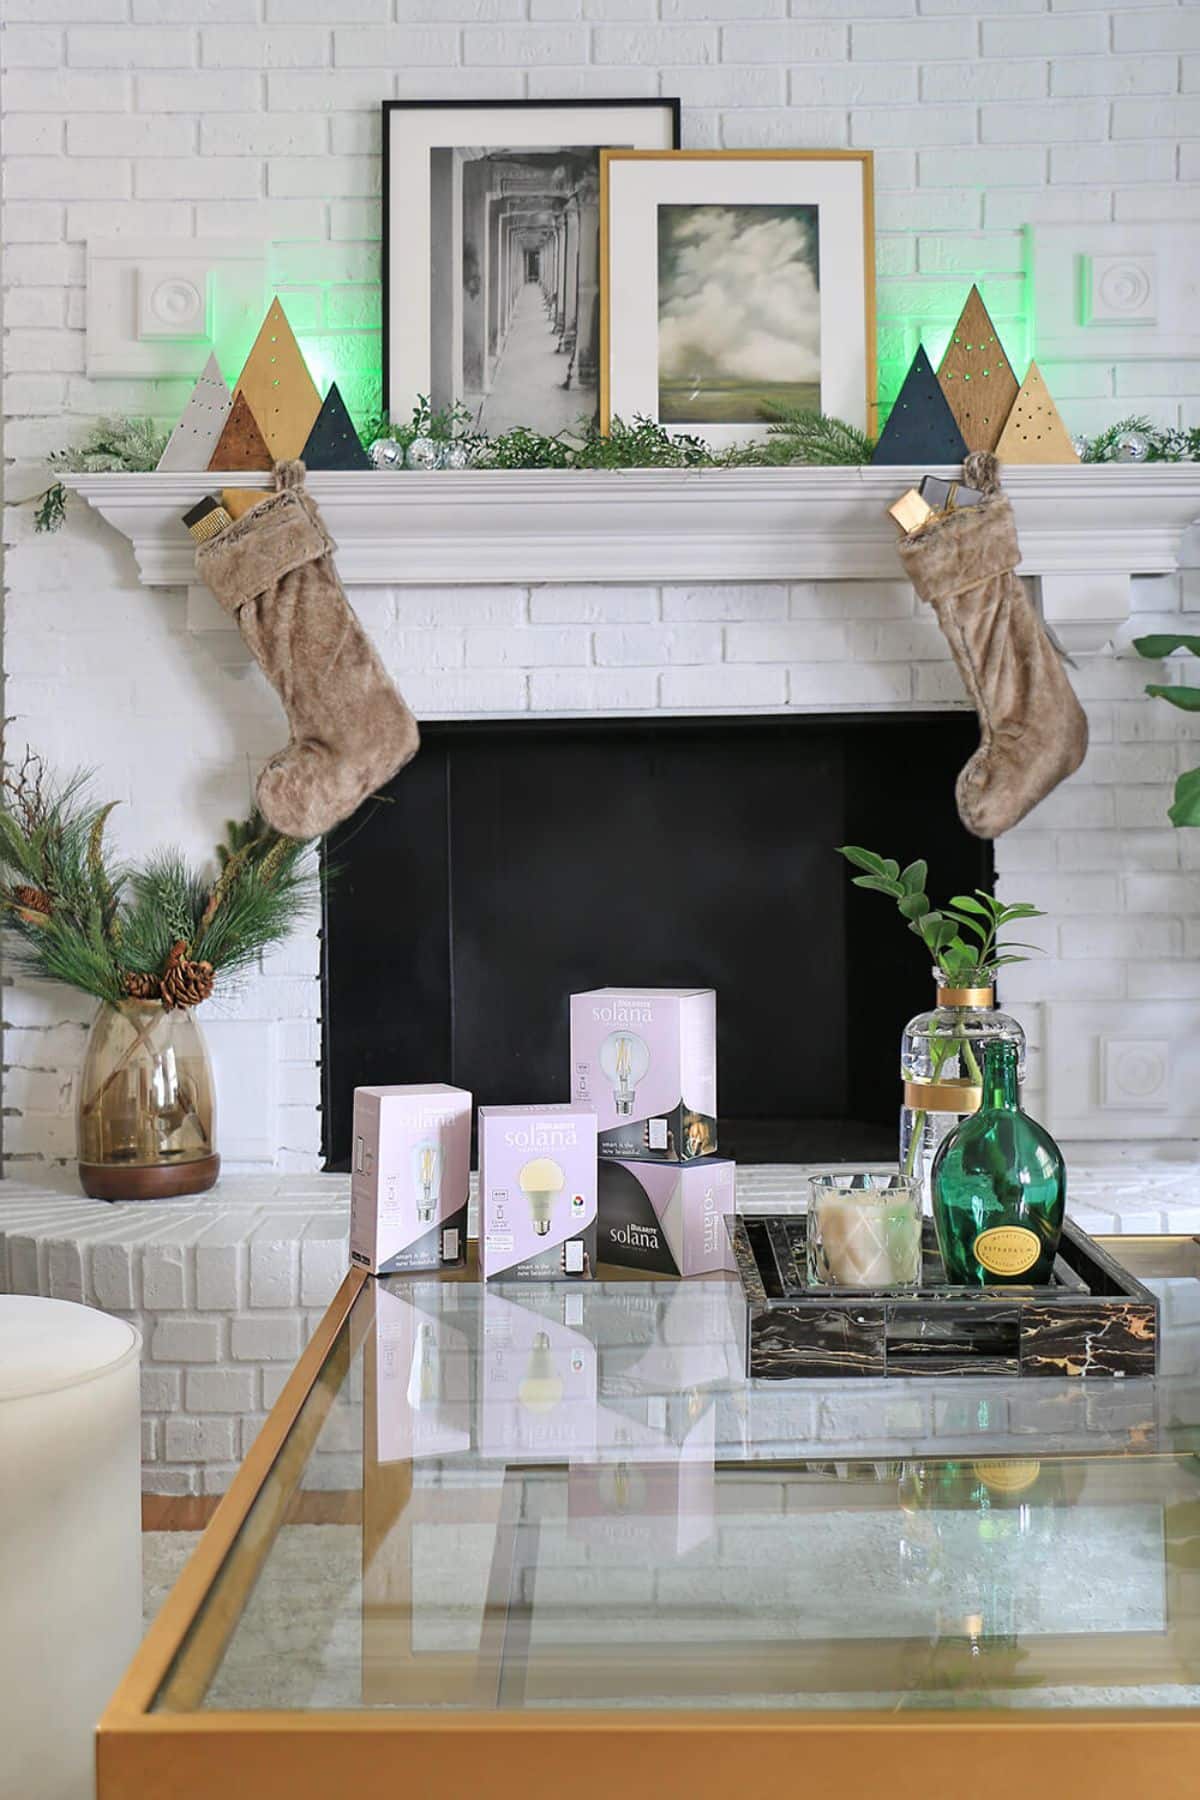 DIY Holiday Light for the Mantel